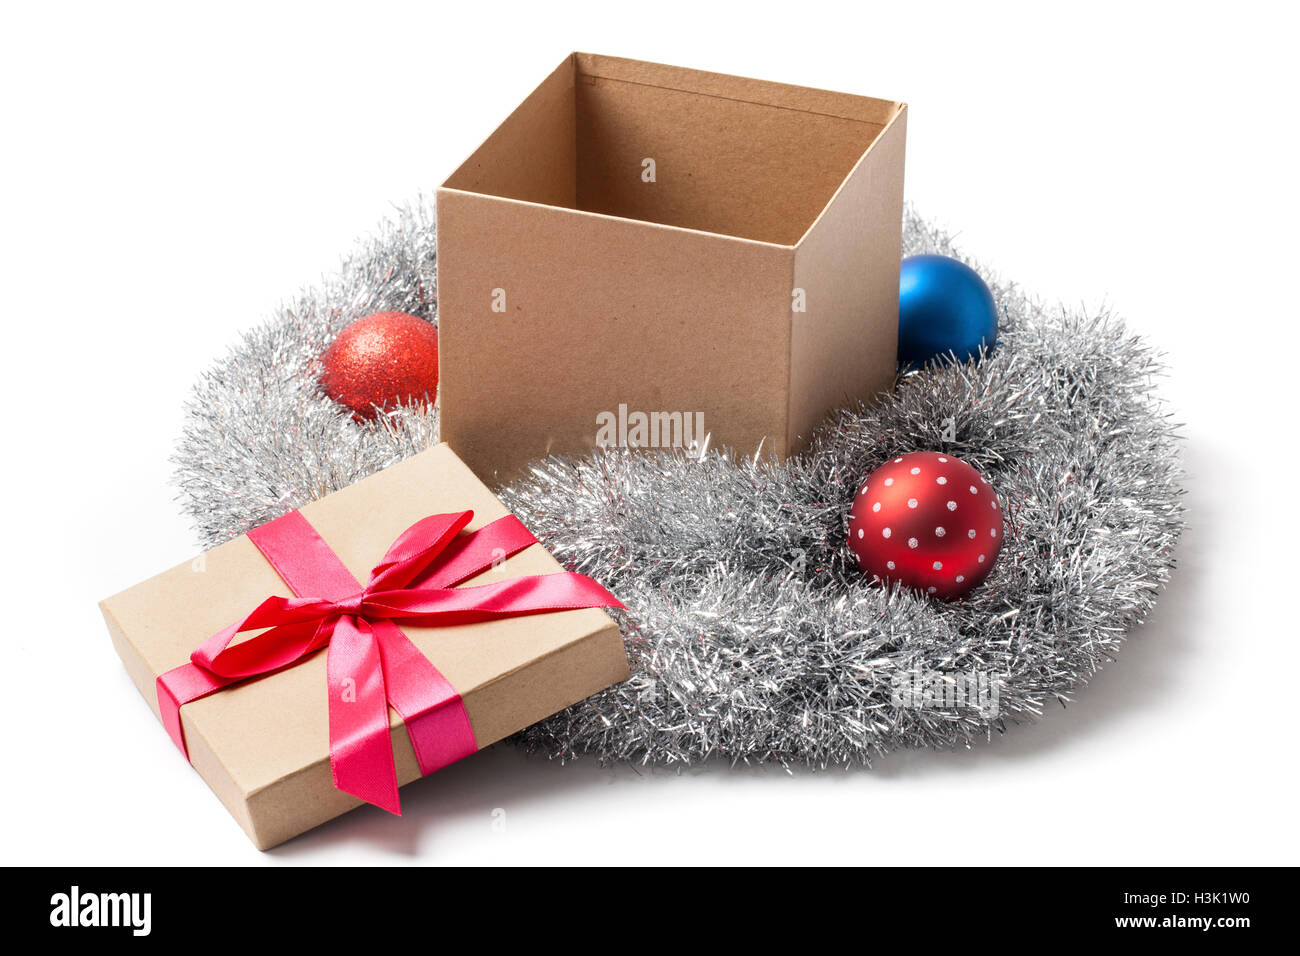 Open Christmas gift box tree balls and tinsels garland isolated on white. Stock Photo